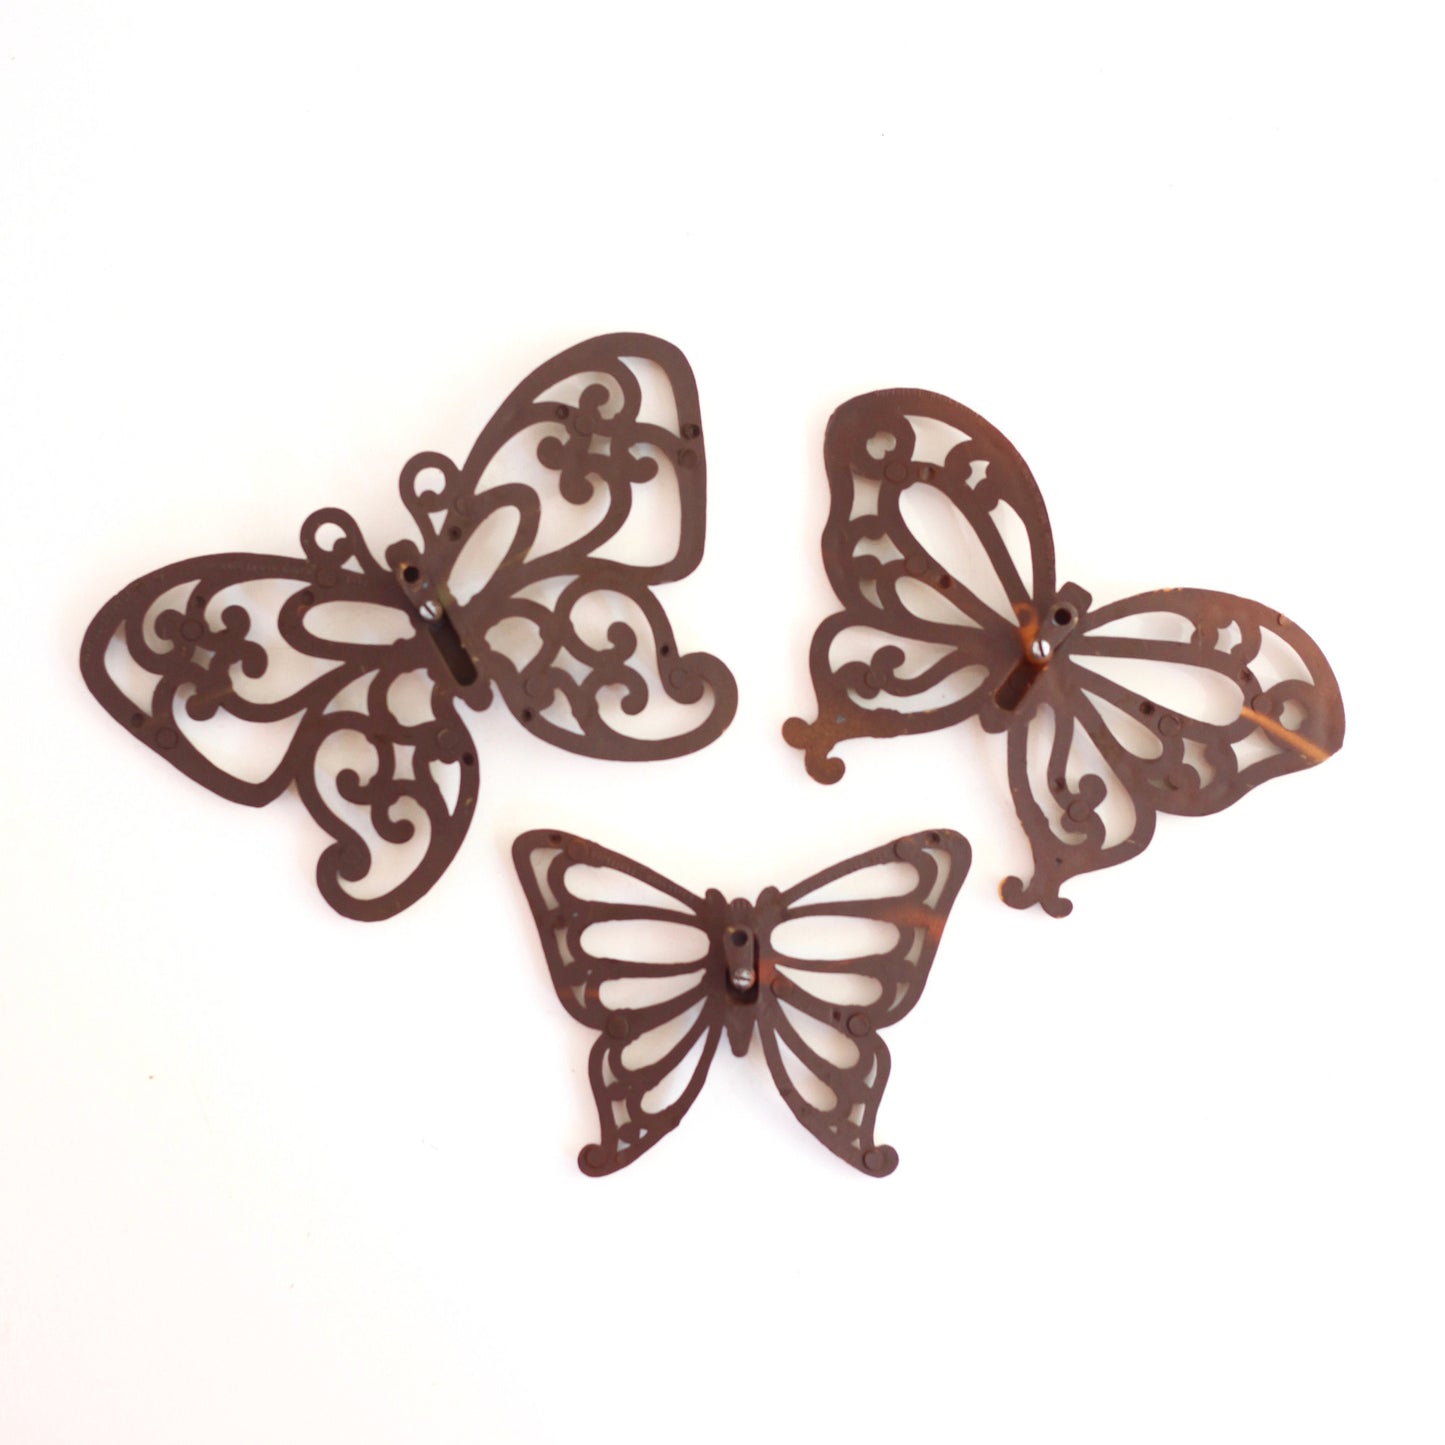 SOLD - Vintage Butterflies Wall Decor by Homco